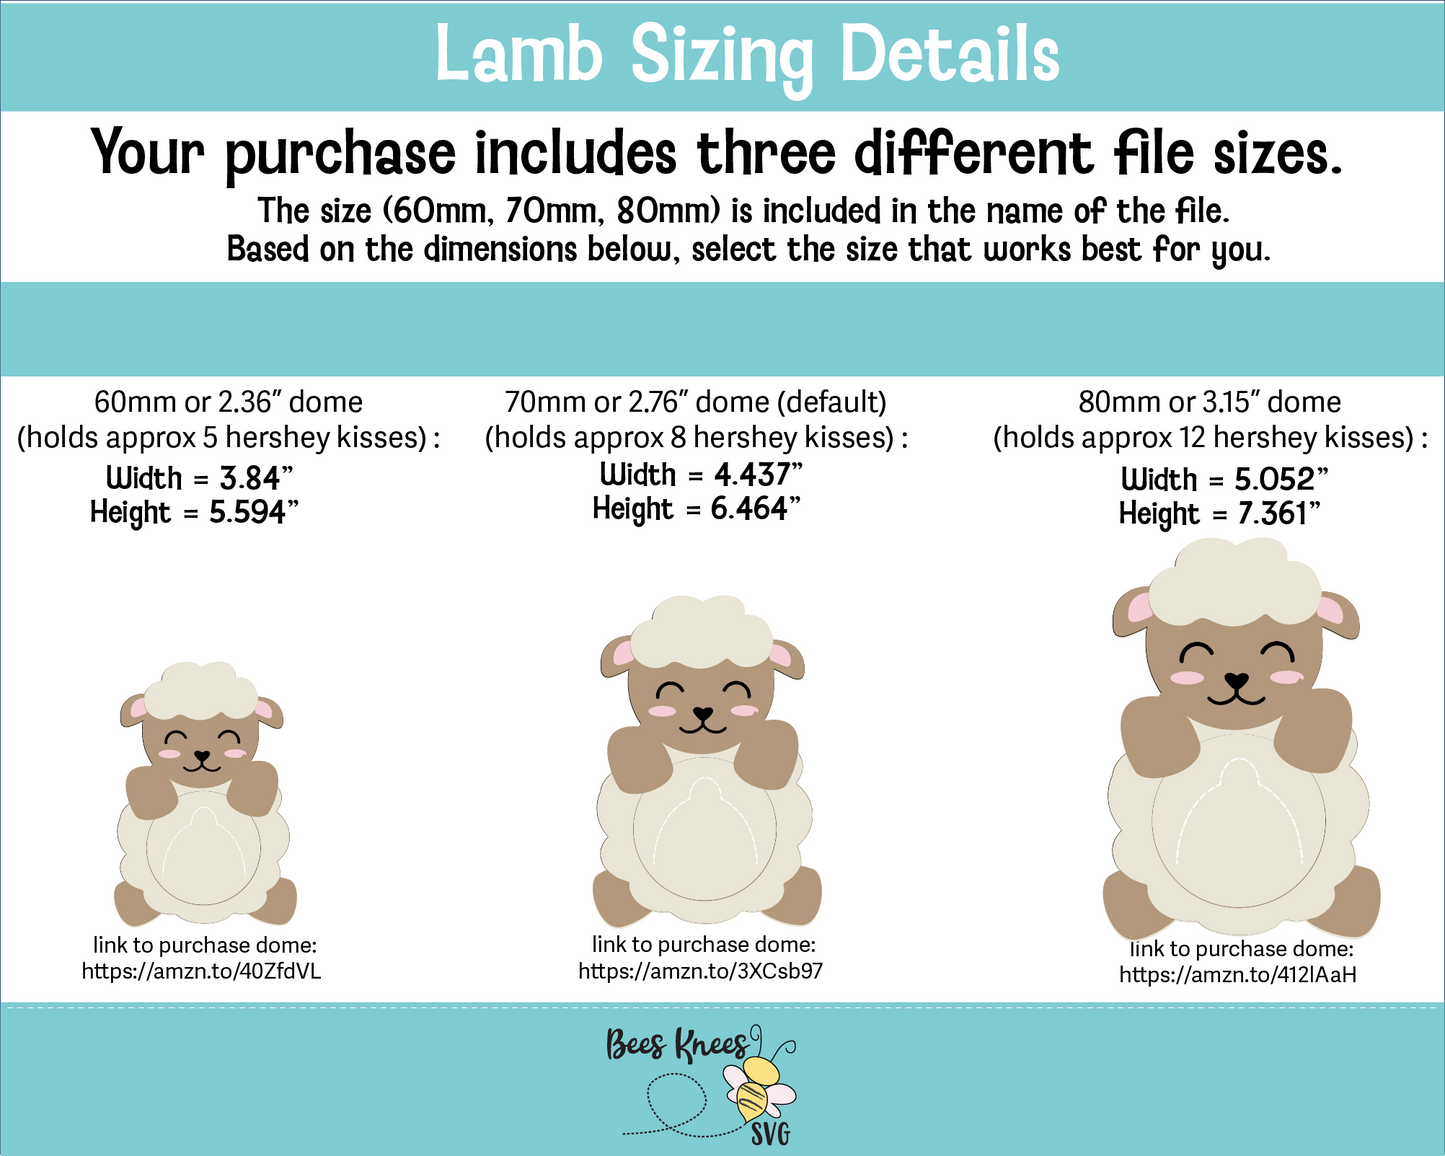 Lamb Dome Candy Holder SVG File